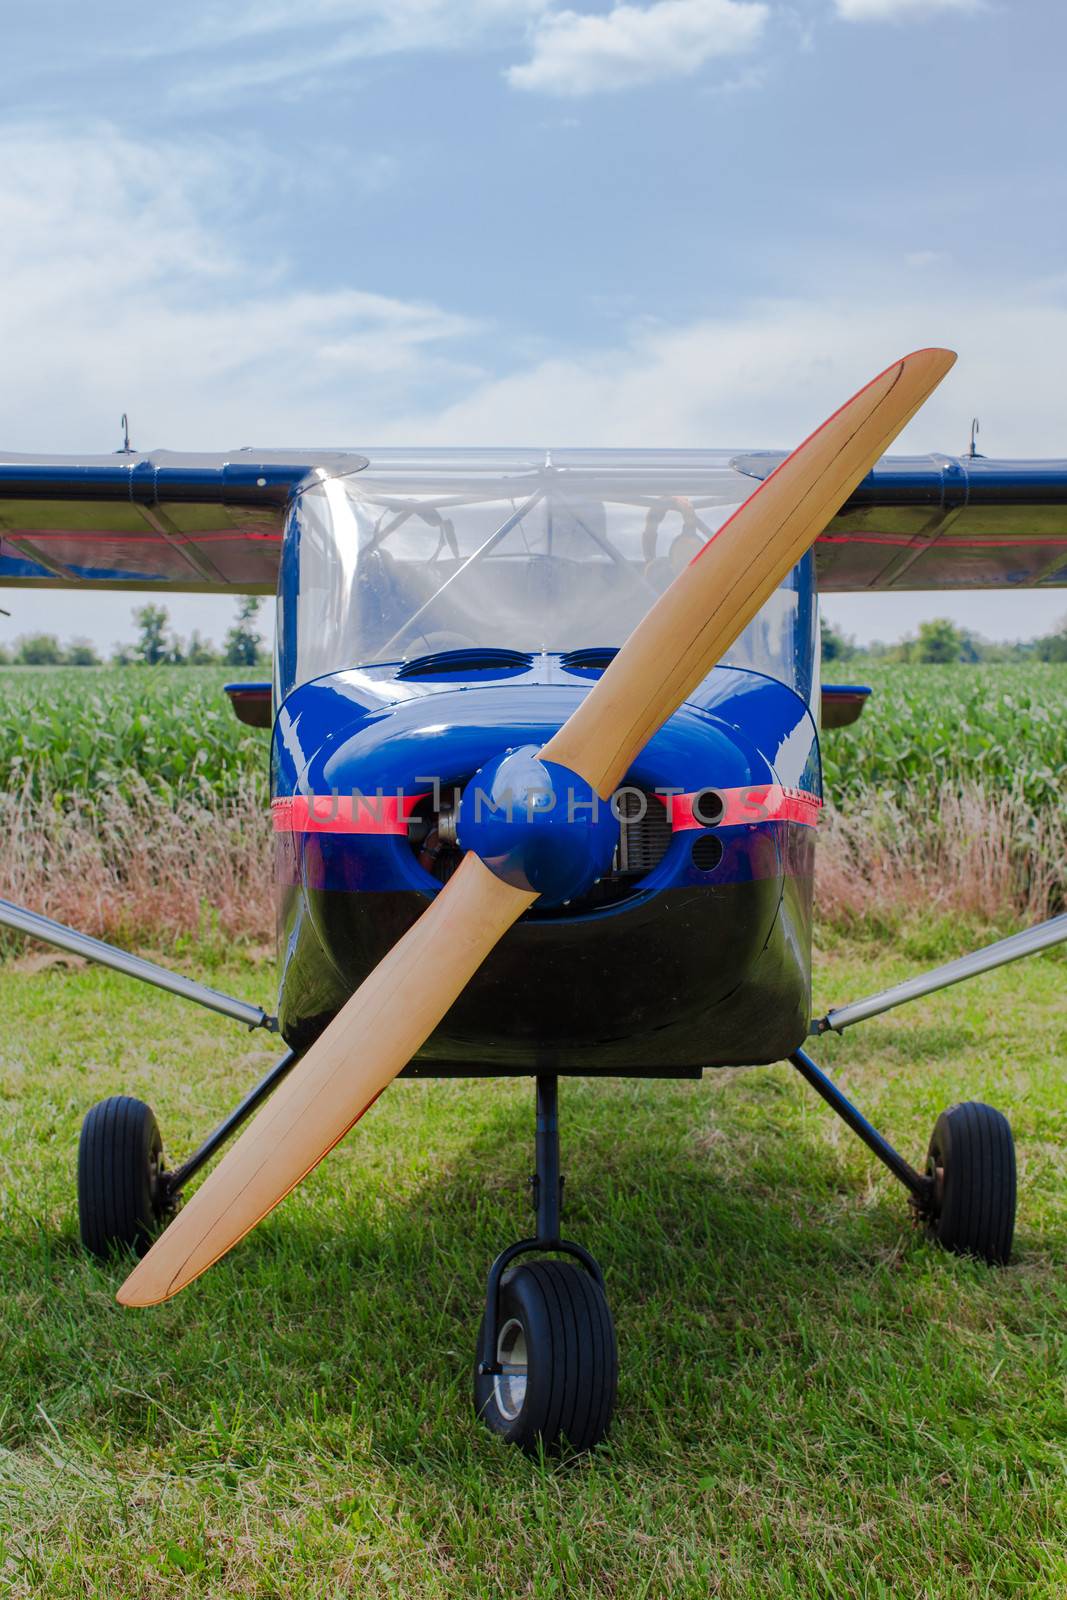 Propeller and nose of a blue single engine fixed wing aircraft parked in a rural field , closeup view